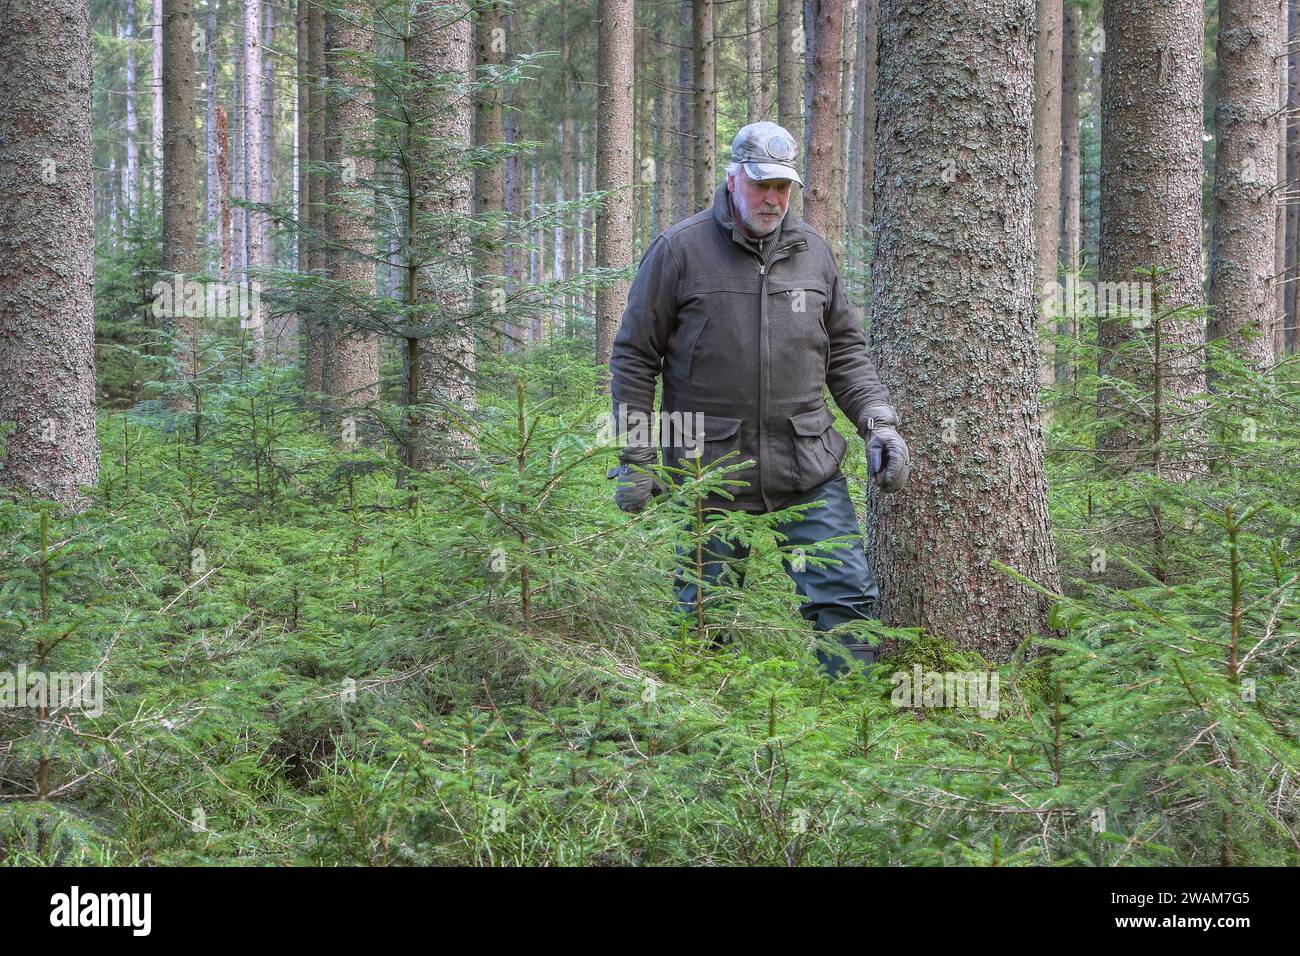 A senior citizen explores the forest full of activity and a sense of adventure spirit and crossing young spruce trees. Stock Photo